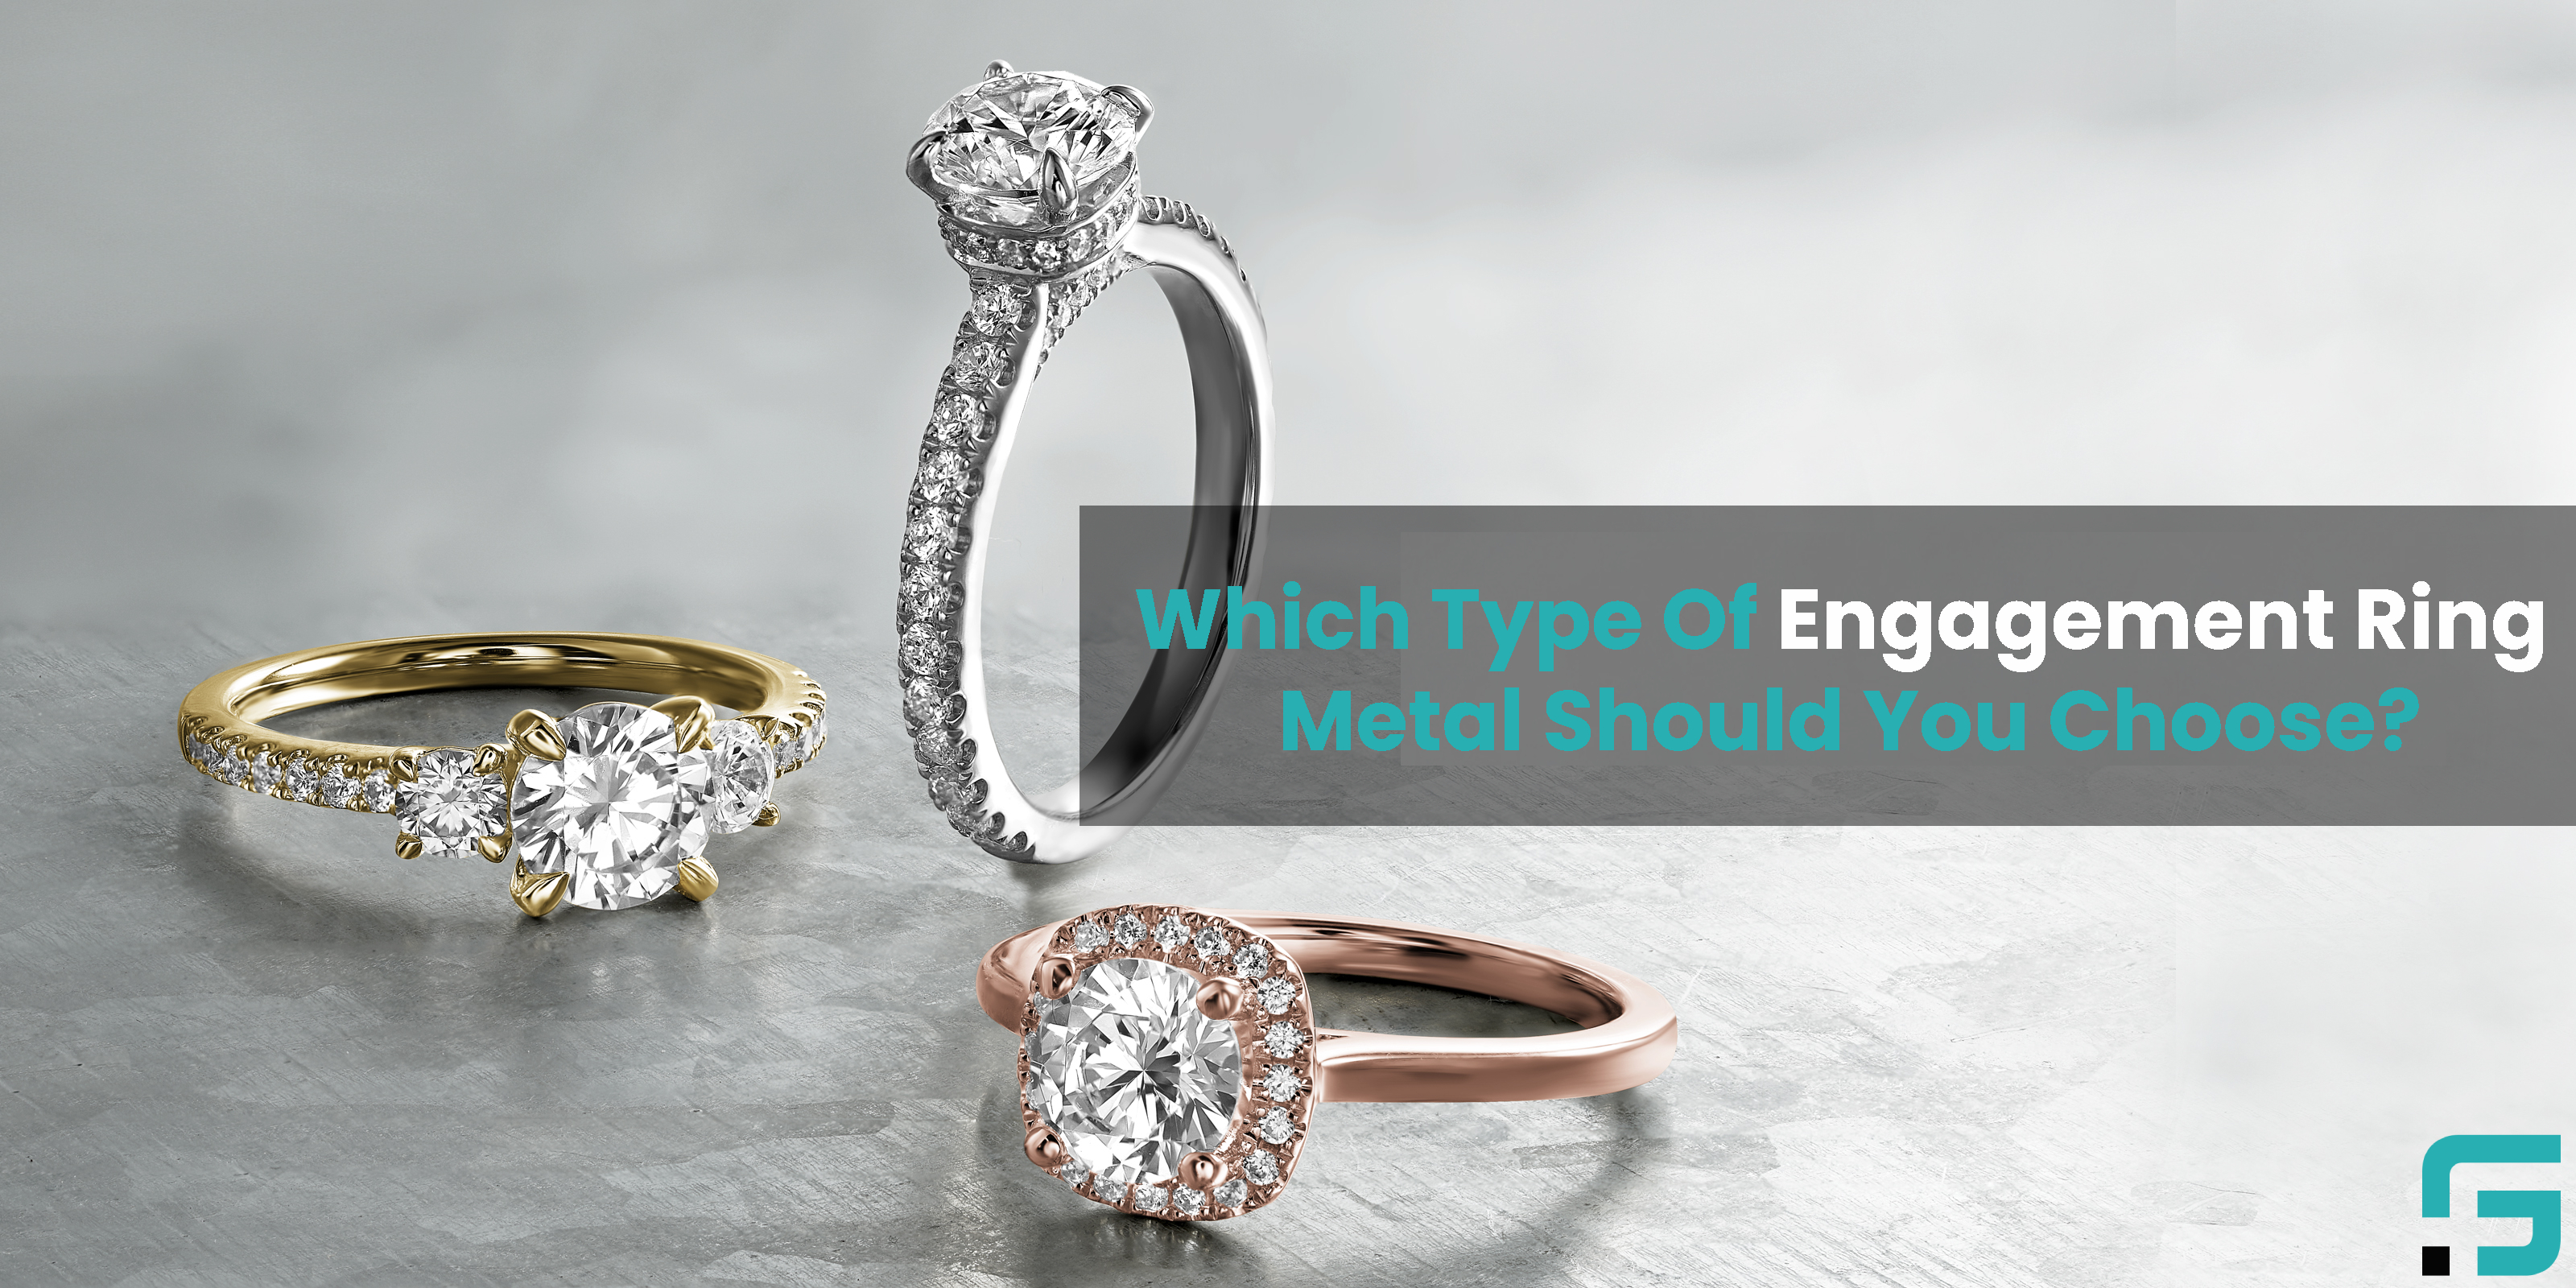 Which type of engagement ring metal should you choose